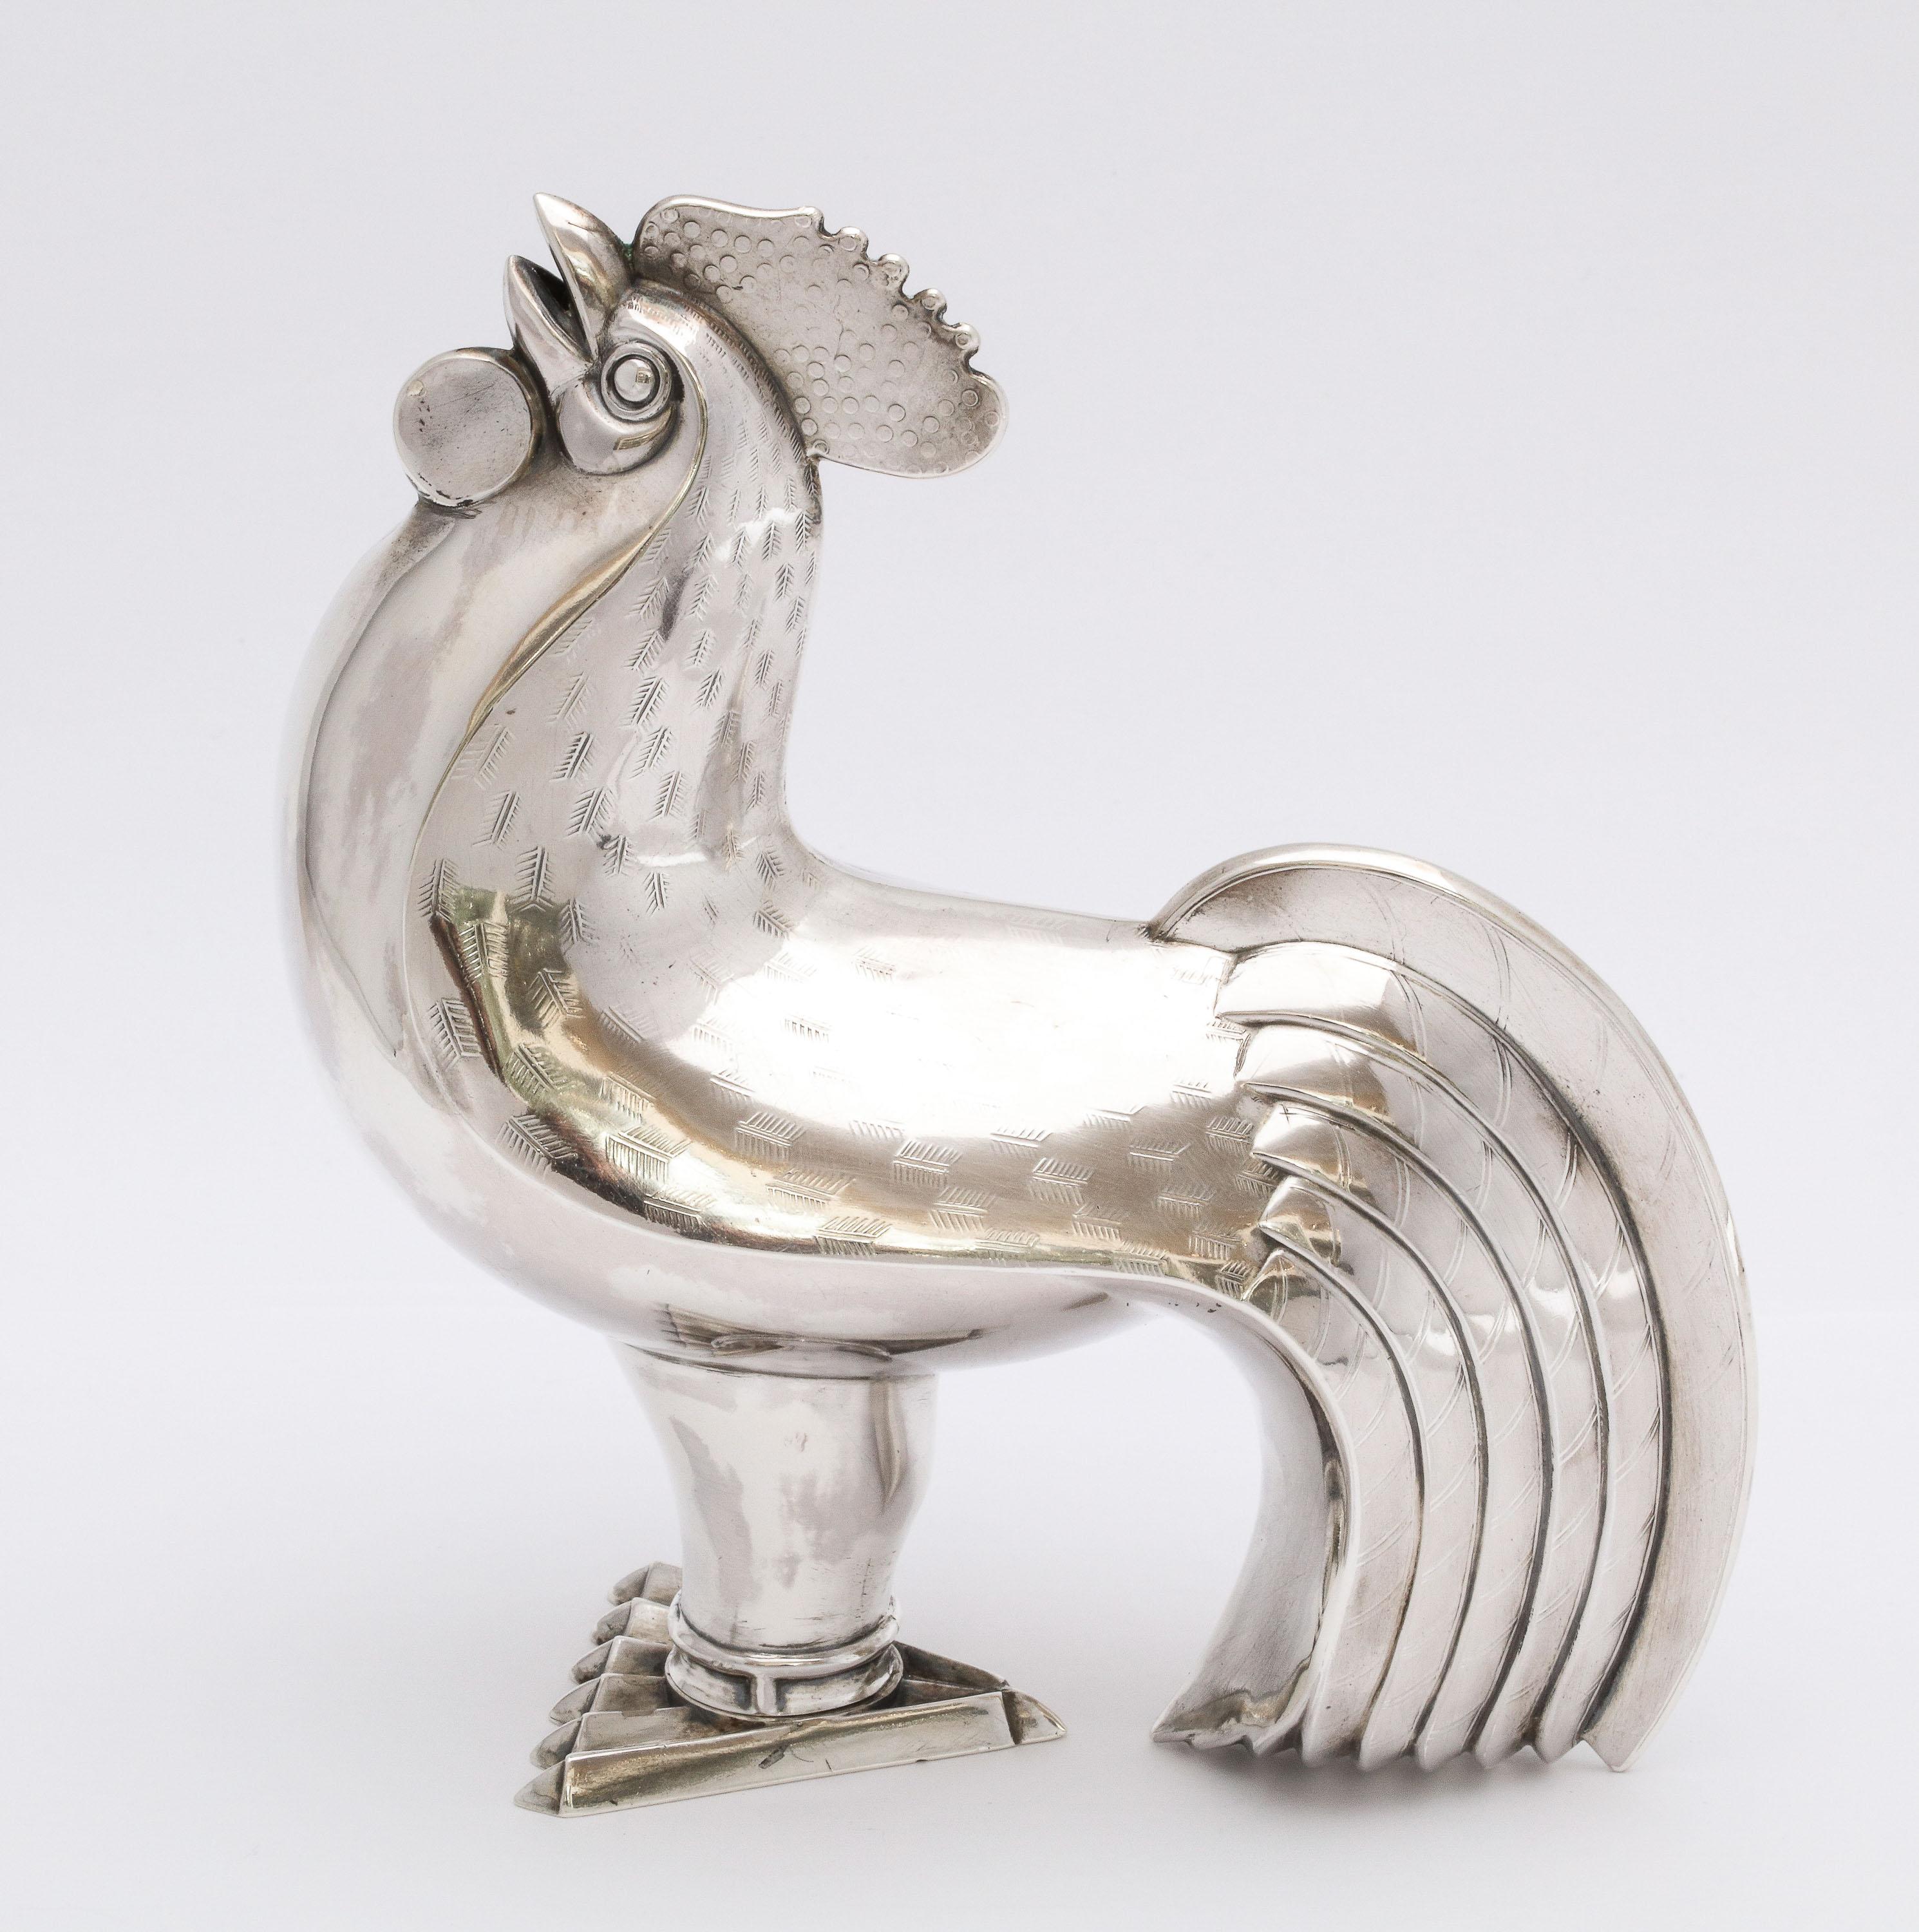 Art Deco, sterling silver, rooster-form sugar caster. Norway, J. Tostrup - maker. Remove the feet to fill the caster and pour sugar through the mouth. Feet opening and closure mechanism is bayonet in design. Measures: 5 1/2 inches high x 5 inches